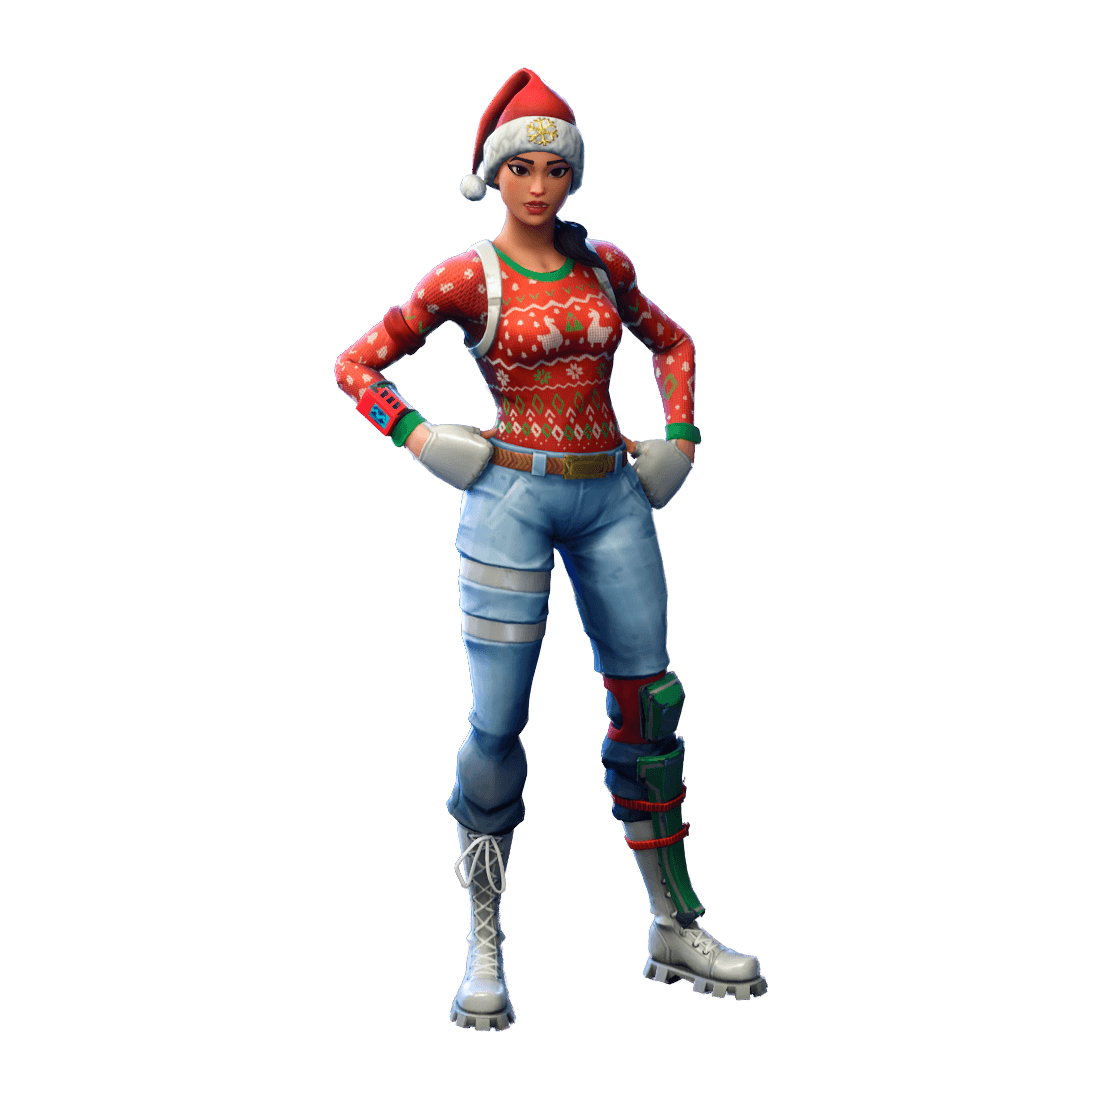 Straw Ops Fortnite Wallpapers